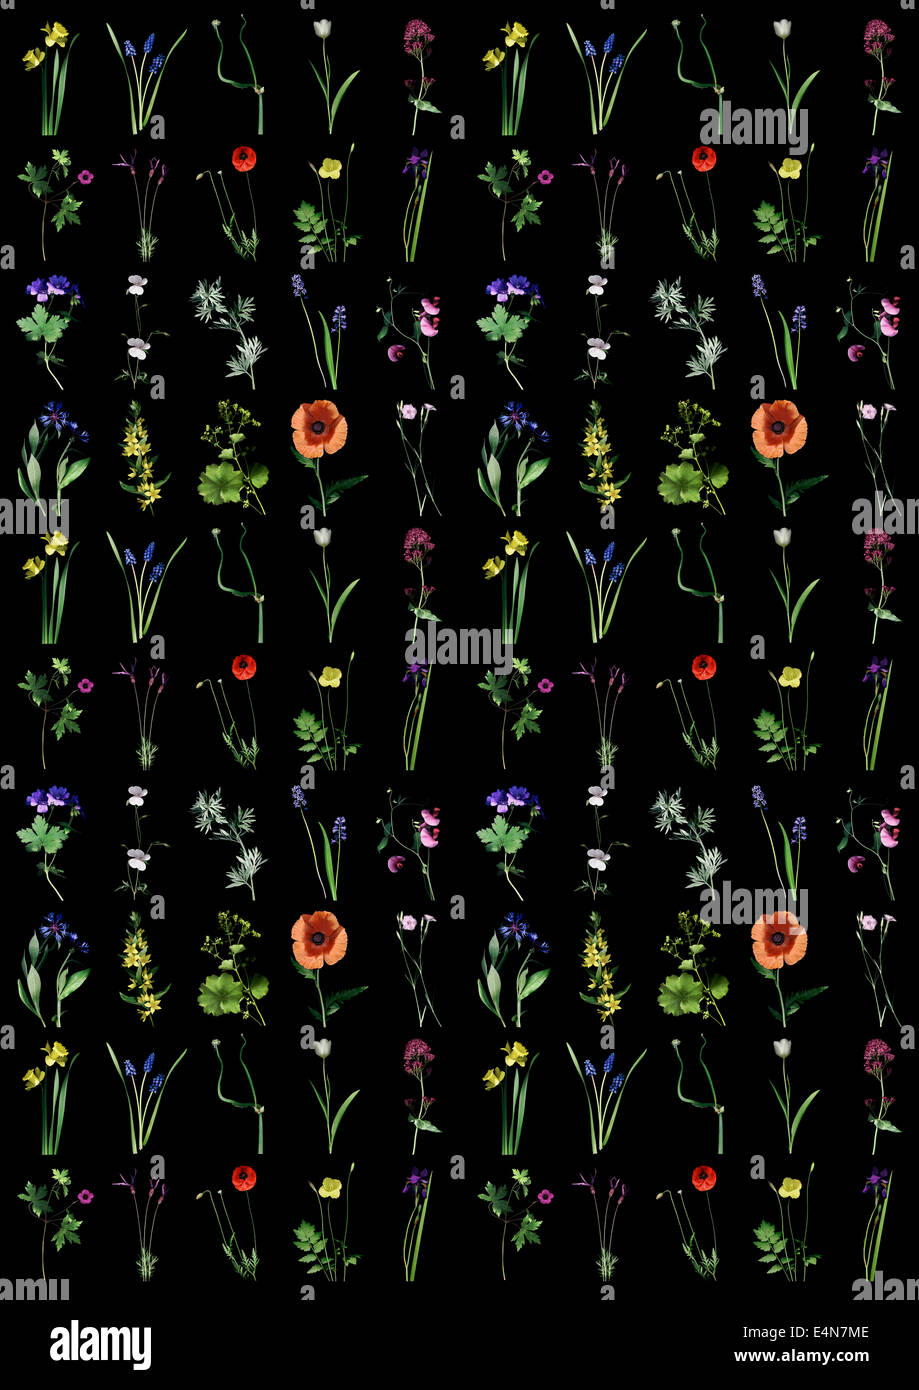 A repeating pattern made from a series of garden flower images on a black background Stock Photo